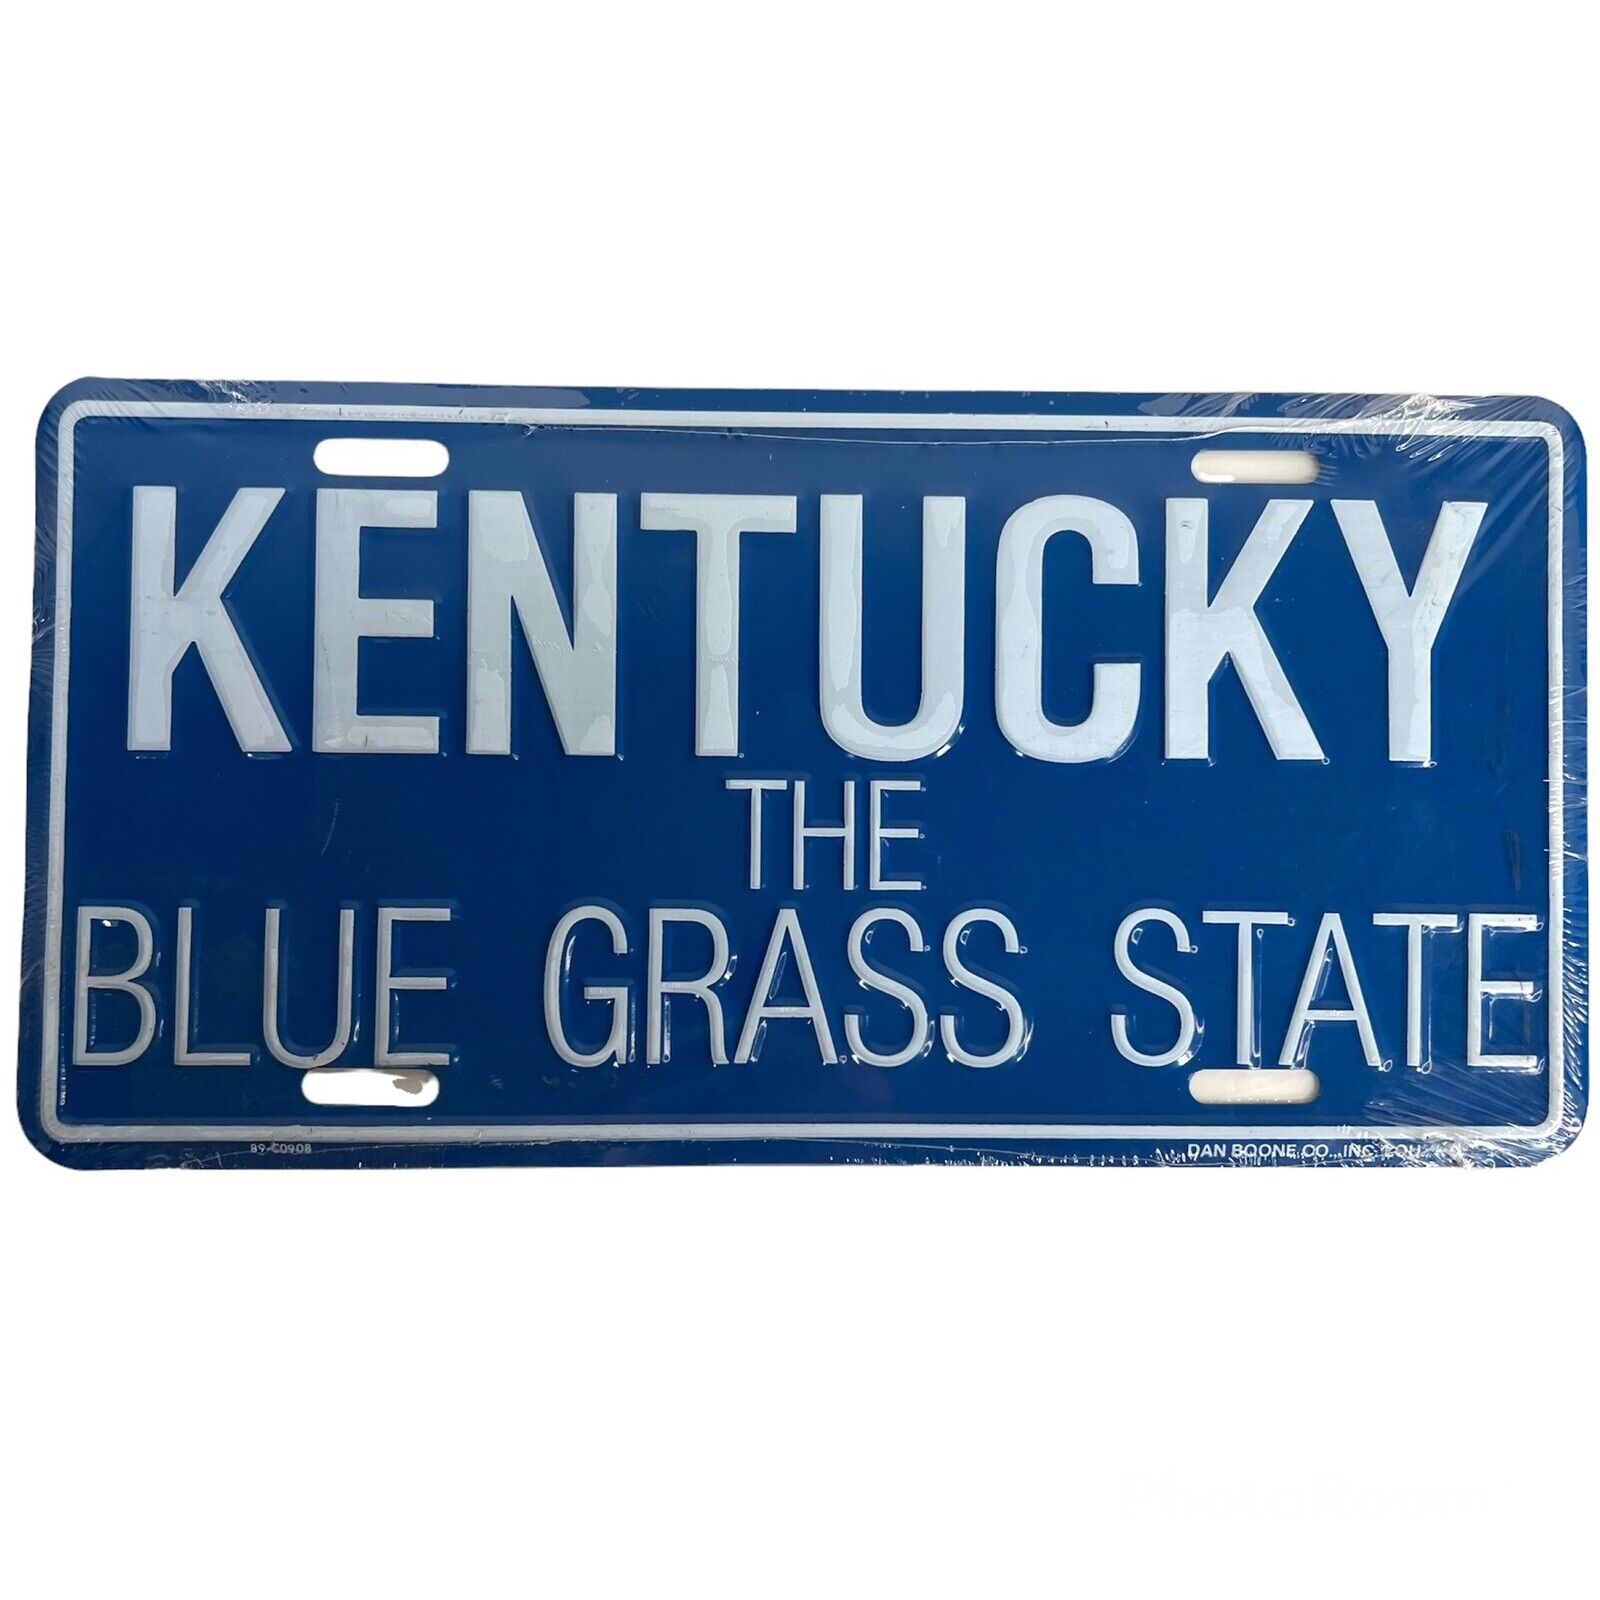 NOS True Vintage Kentucky The Blue Grass State Booster License Plate Vanity KY